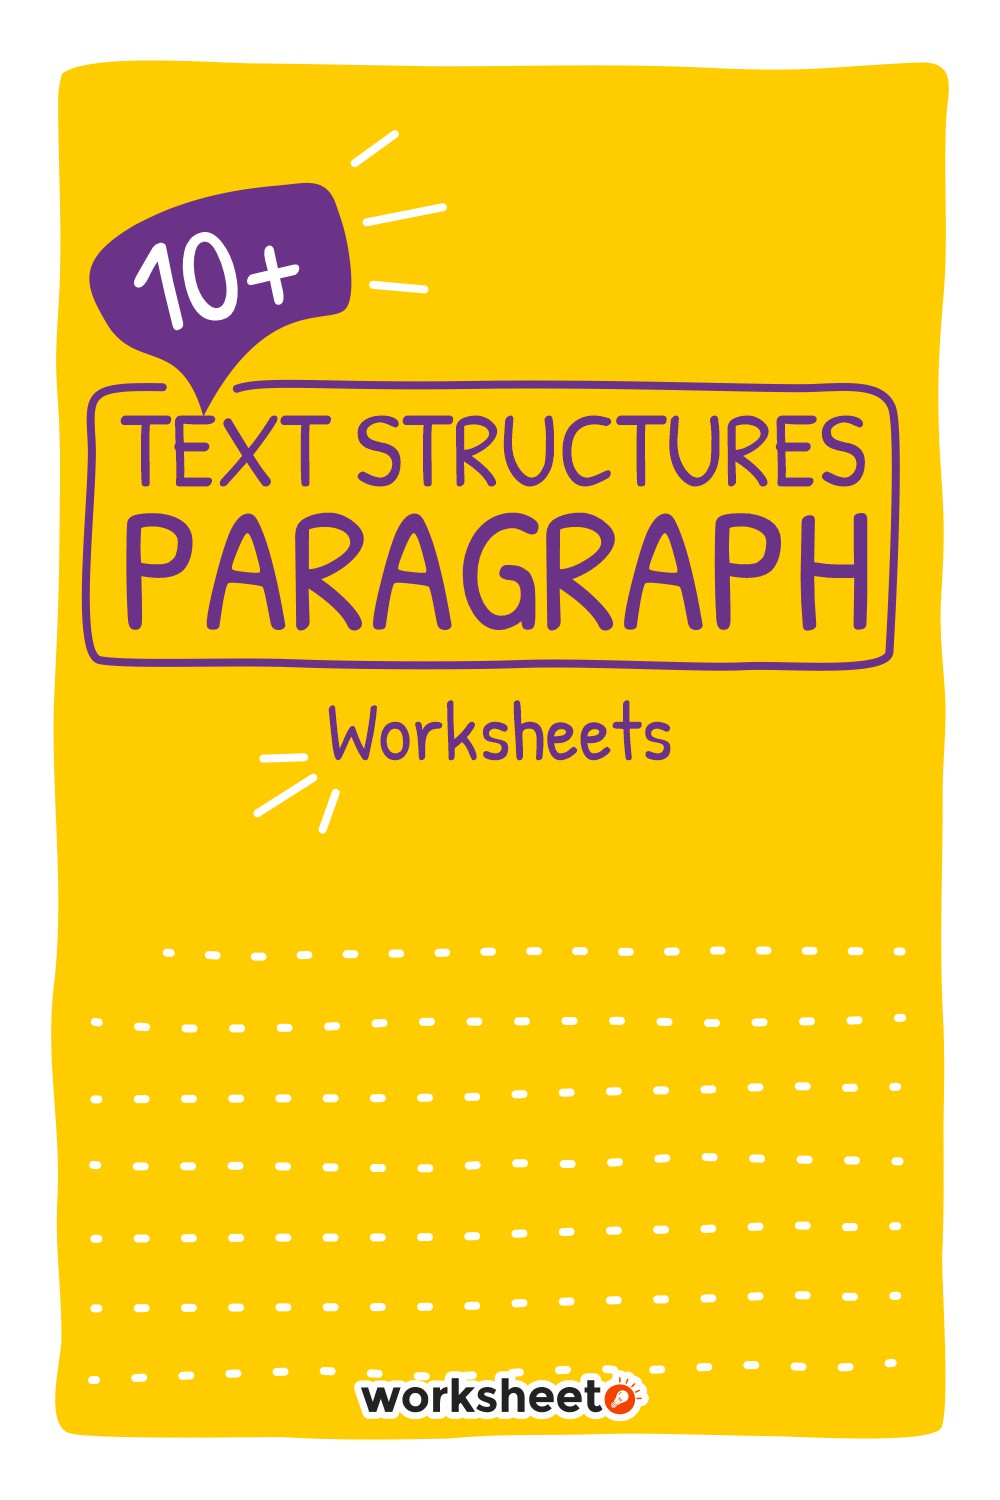 Text Structure Paragraphs Worksheets